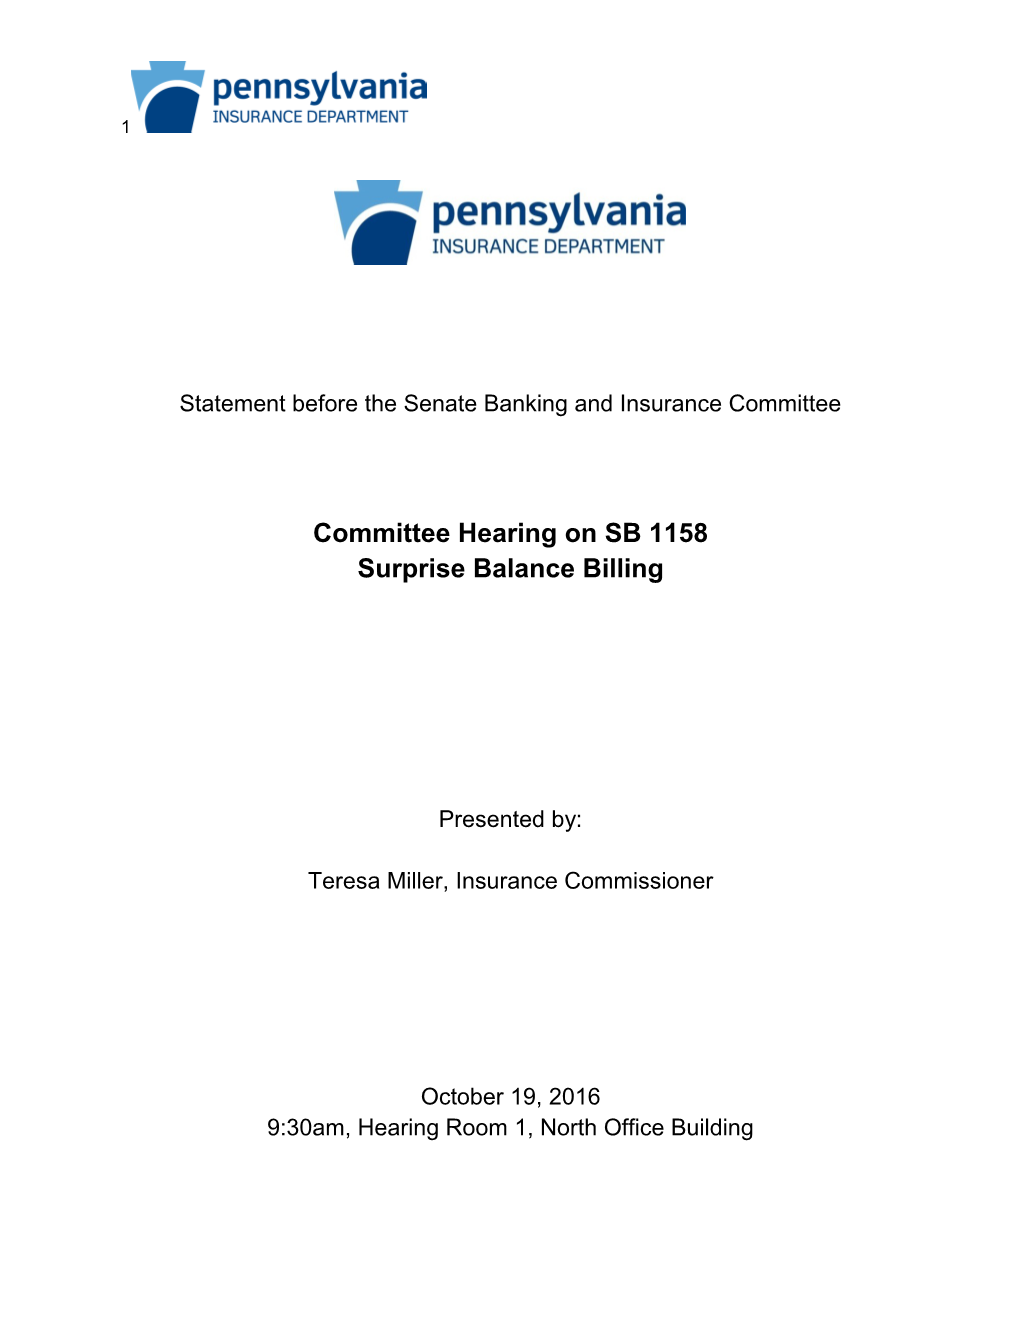 Statement Before the Senate Banking and Insurance Committee